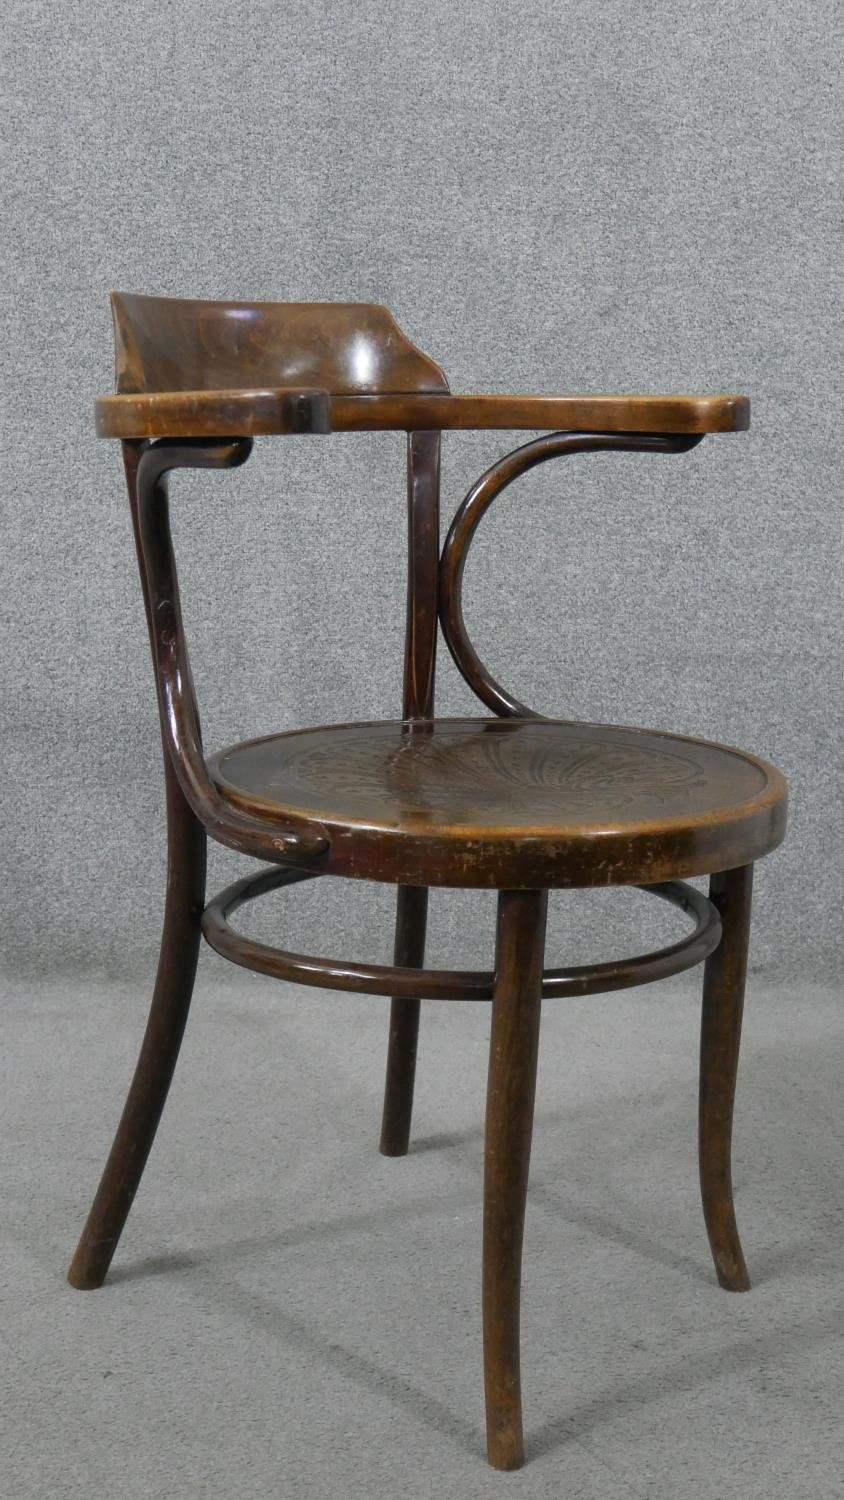 A late 19th/early 20th century Thonet style bentwood open armchair, with a circular pokerwork seat - Image 6 of 8